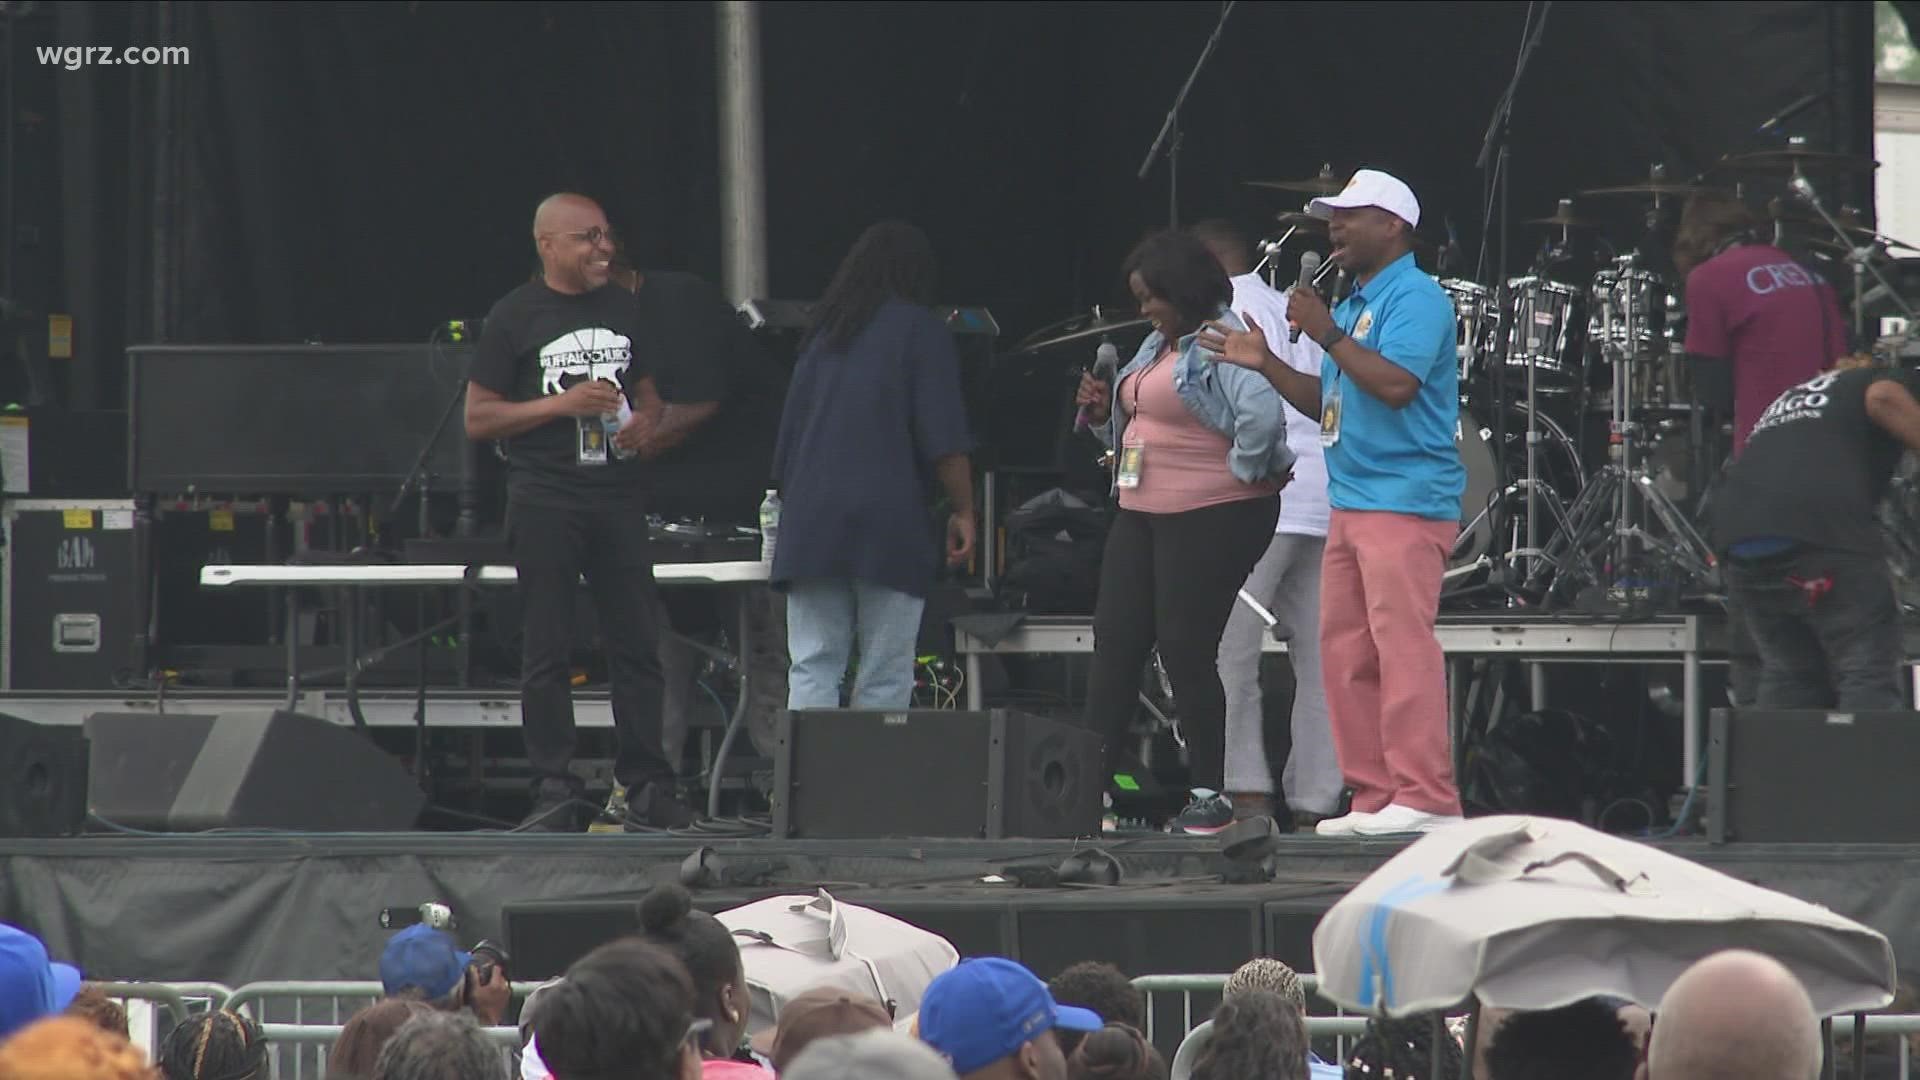 Entertainers and elected officials took to stage at the University United Festival to share uplifting messages.